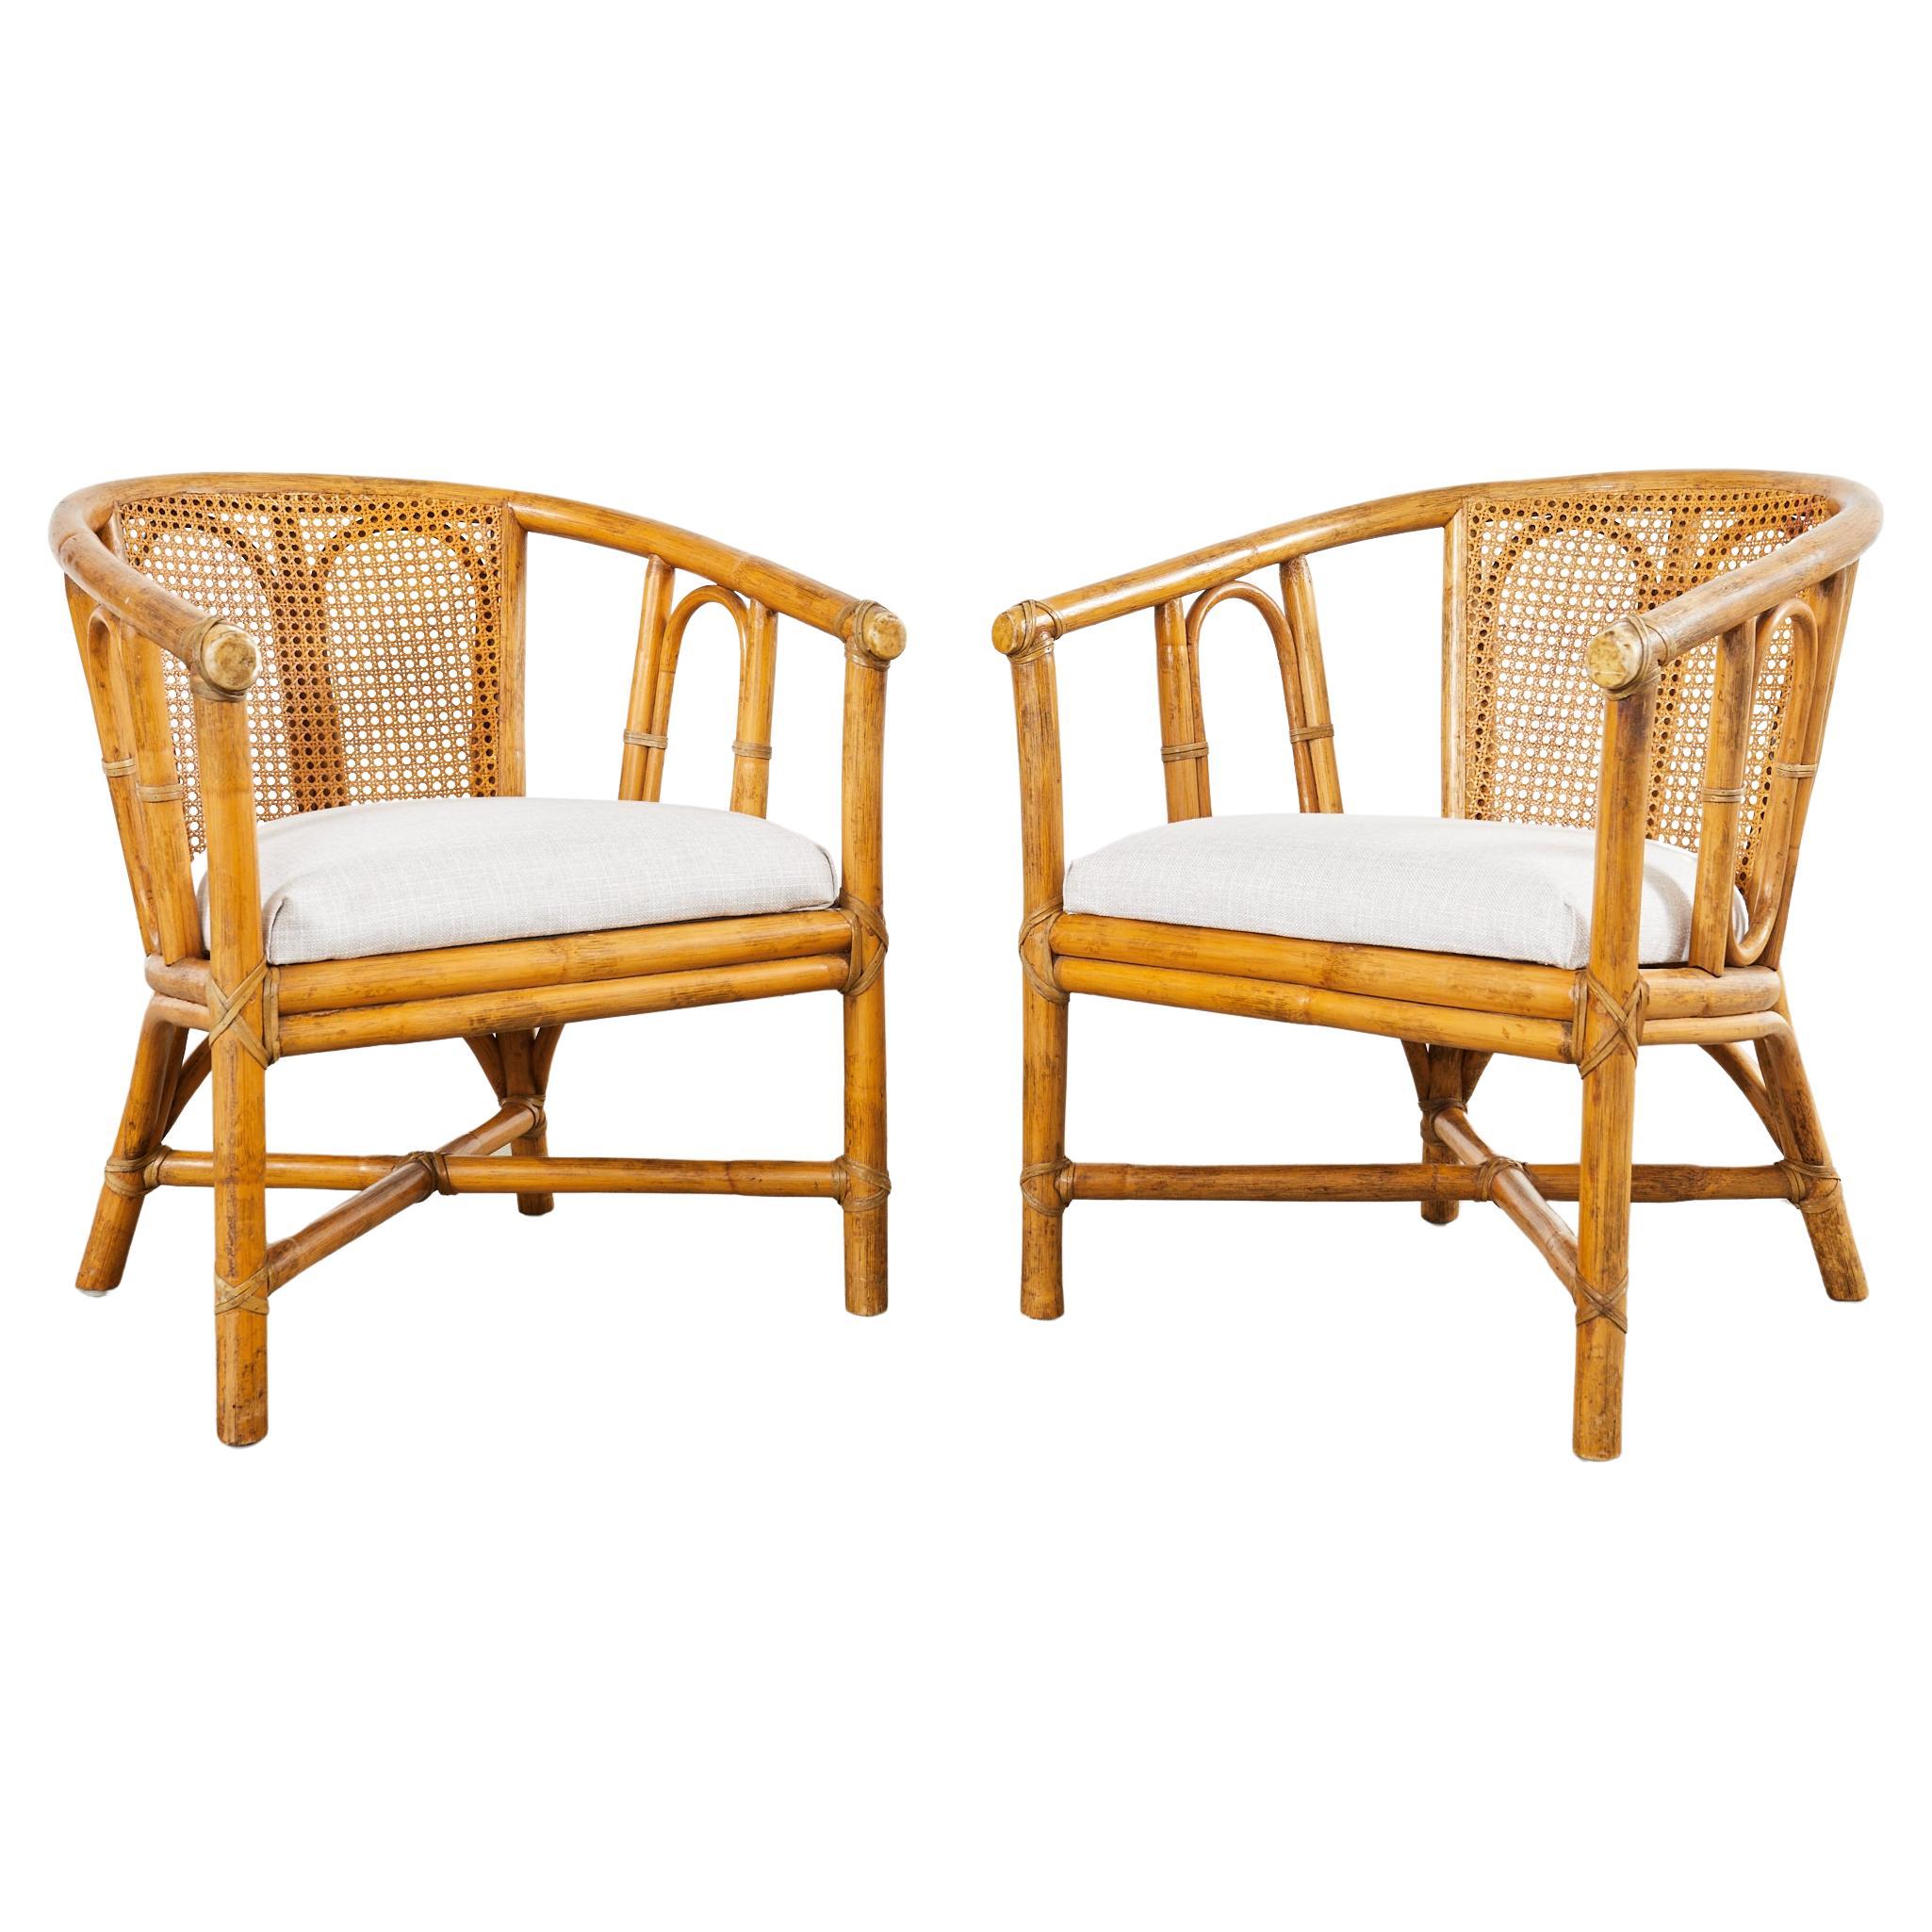 Pair of McGuire Organic Modern Style Rattan Cane Barrel Lounge Chairs For Sale